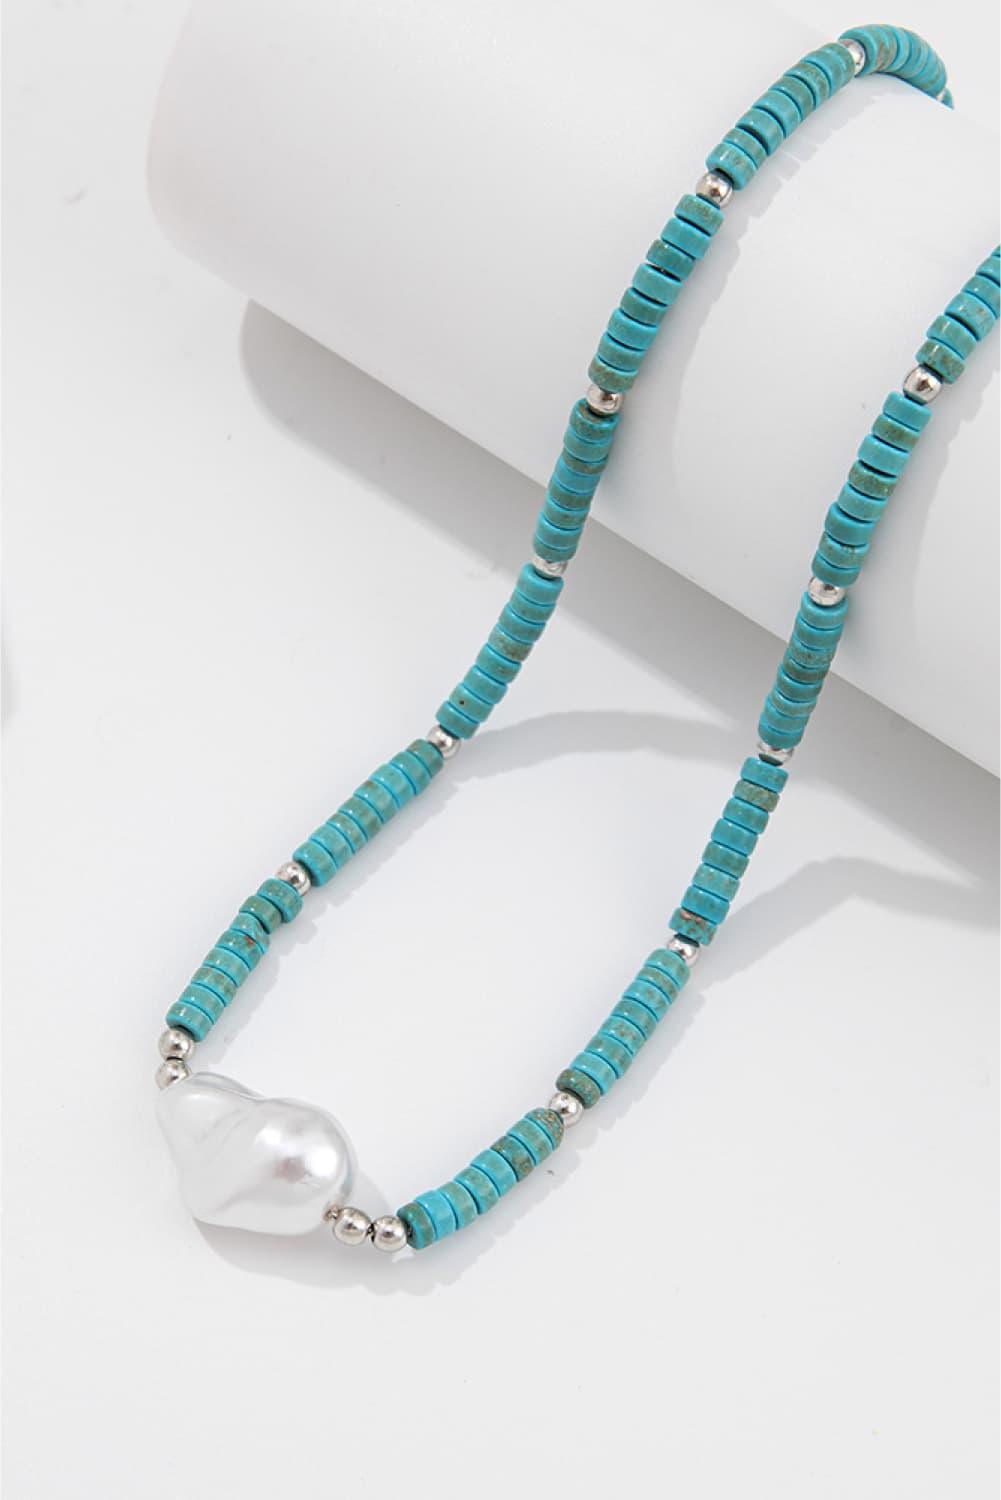 Turquoise & Pearl Necklace - Lab Fashion, Home & Health